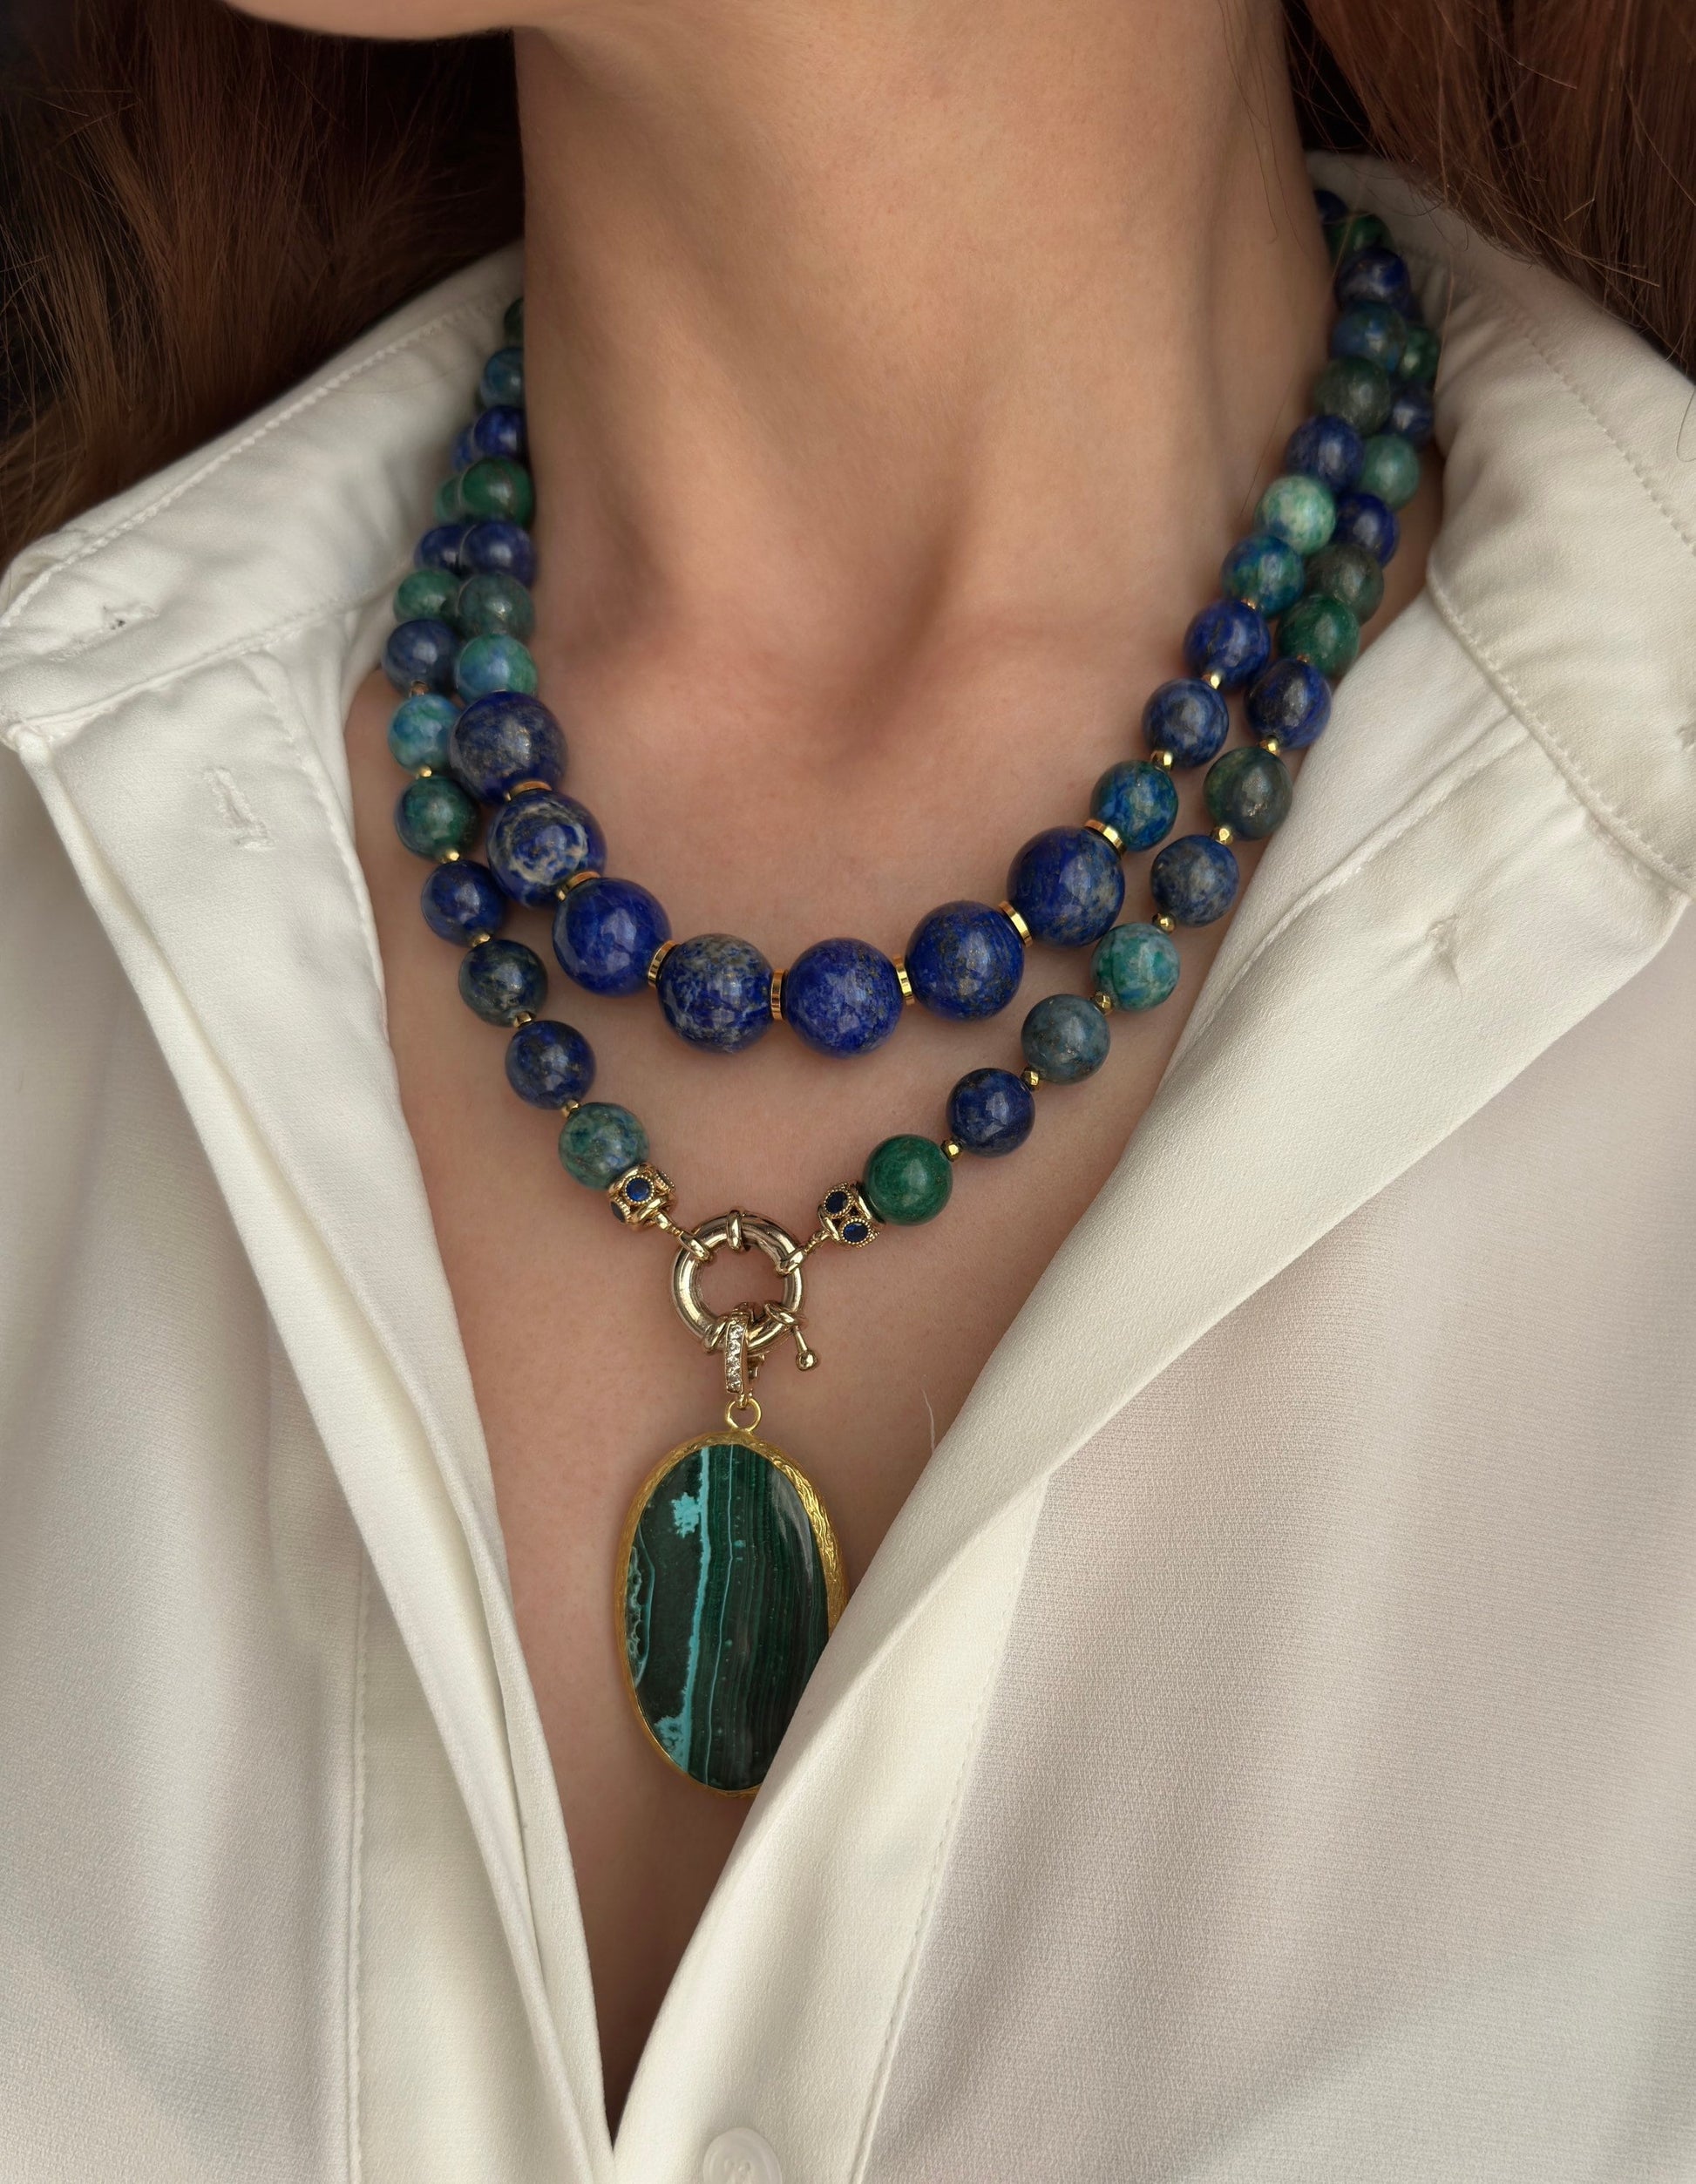 Azurite Necklace, Beaded Lapis Lazuli Jewelry for Women, Green and Blue Gemstone Necklace for Her, Anniversary gift